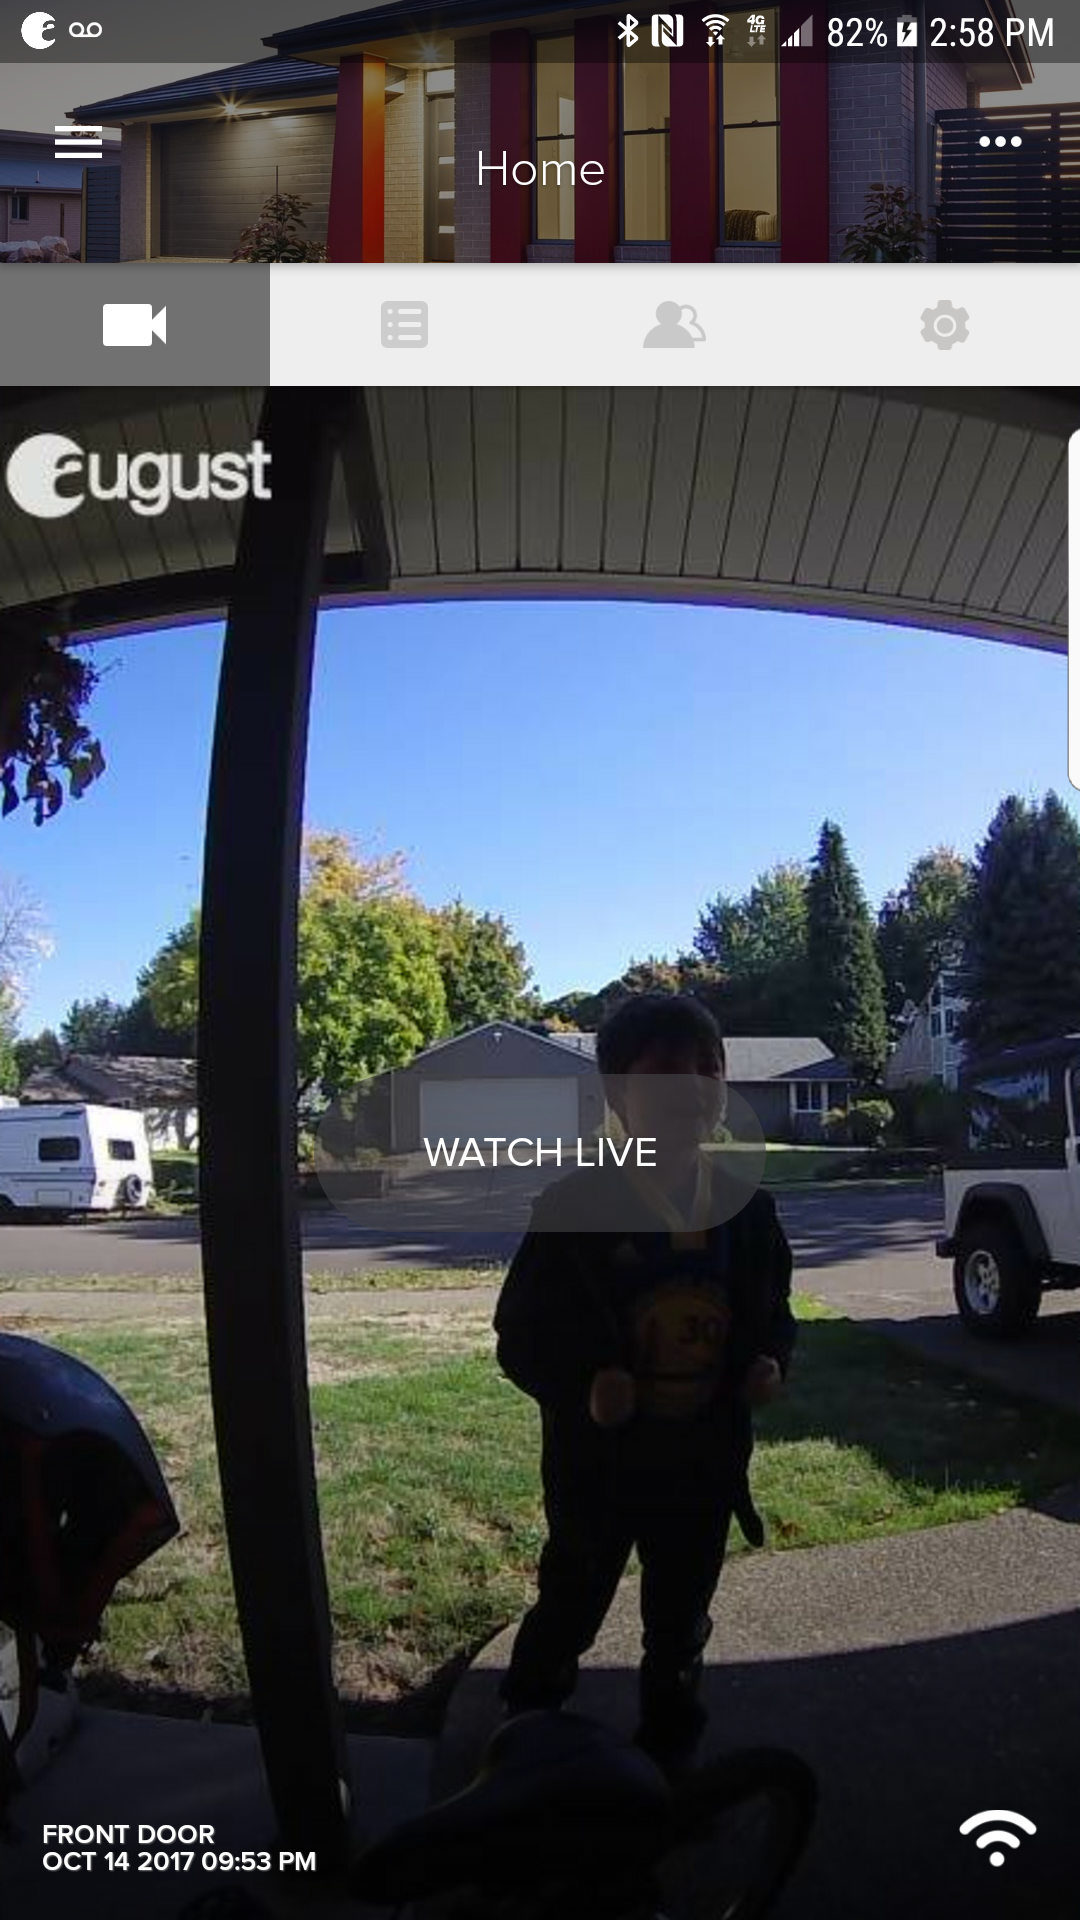 Watch Live is where you can answer the doorbell or view a live stream at any time. The background is routinely updated.